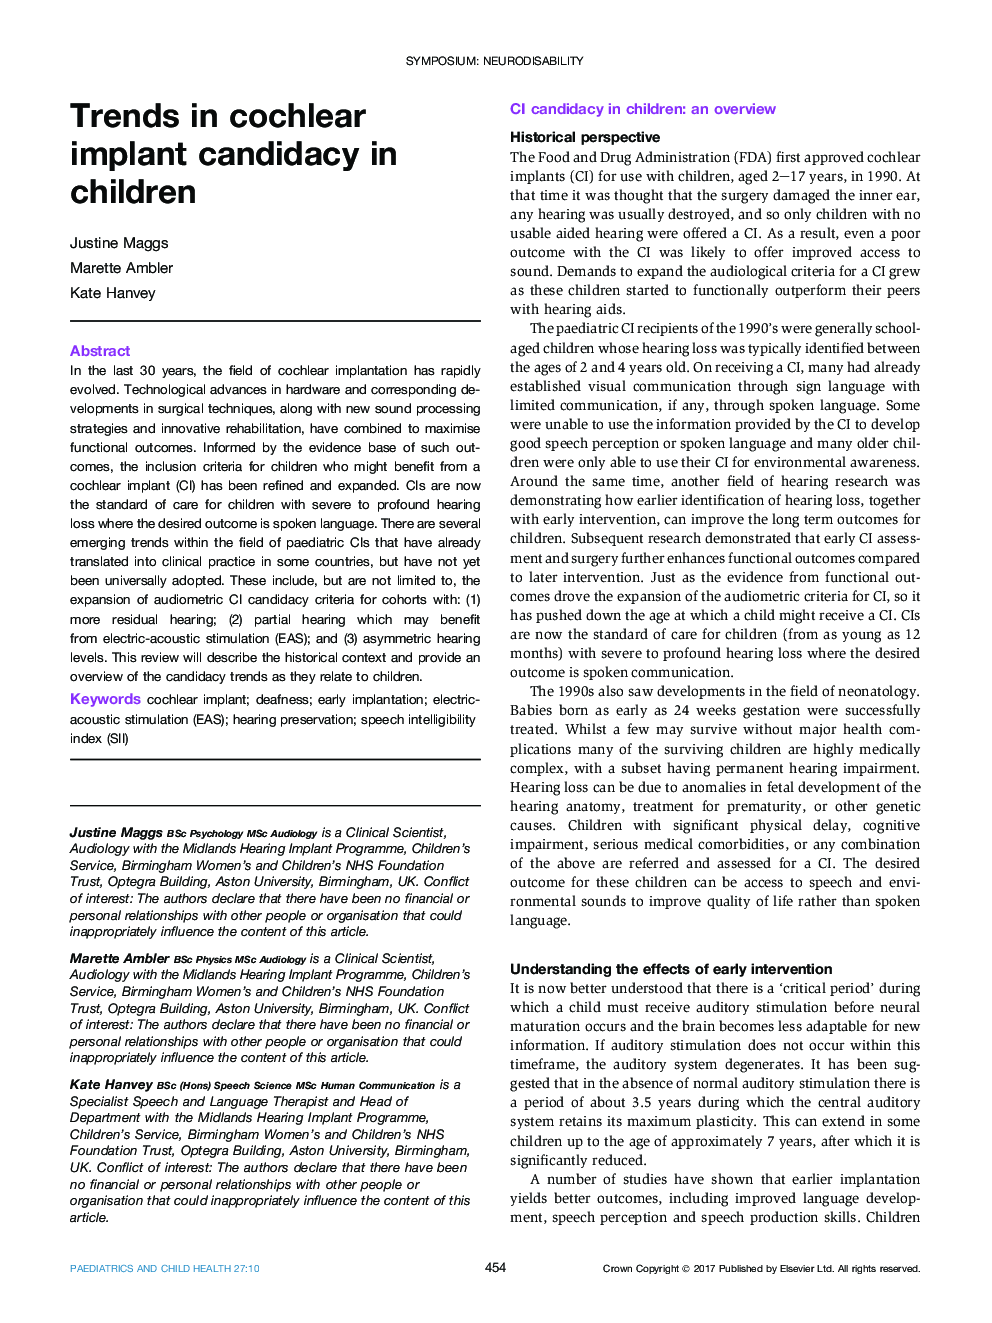 Symposium: neurodisabilityTrends in cochlear implant candidacy in children